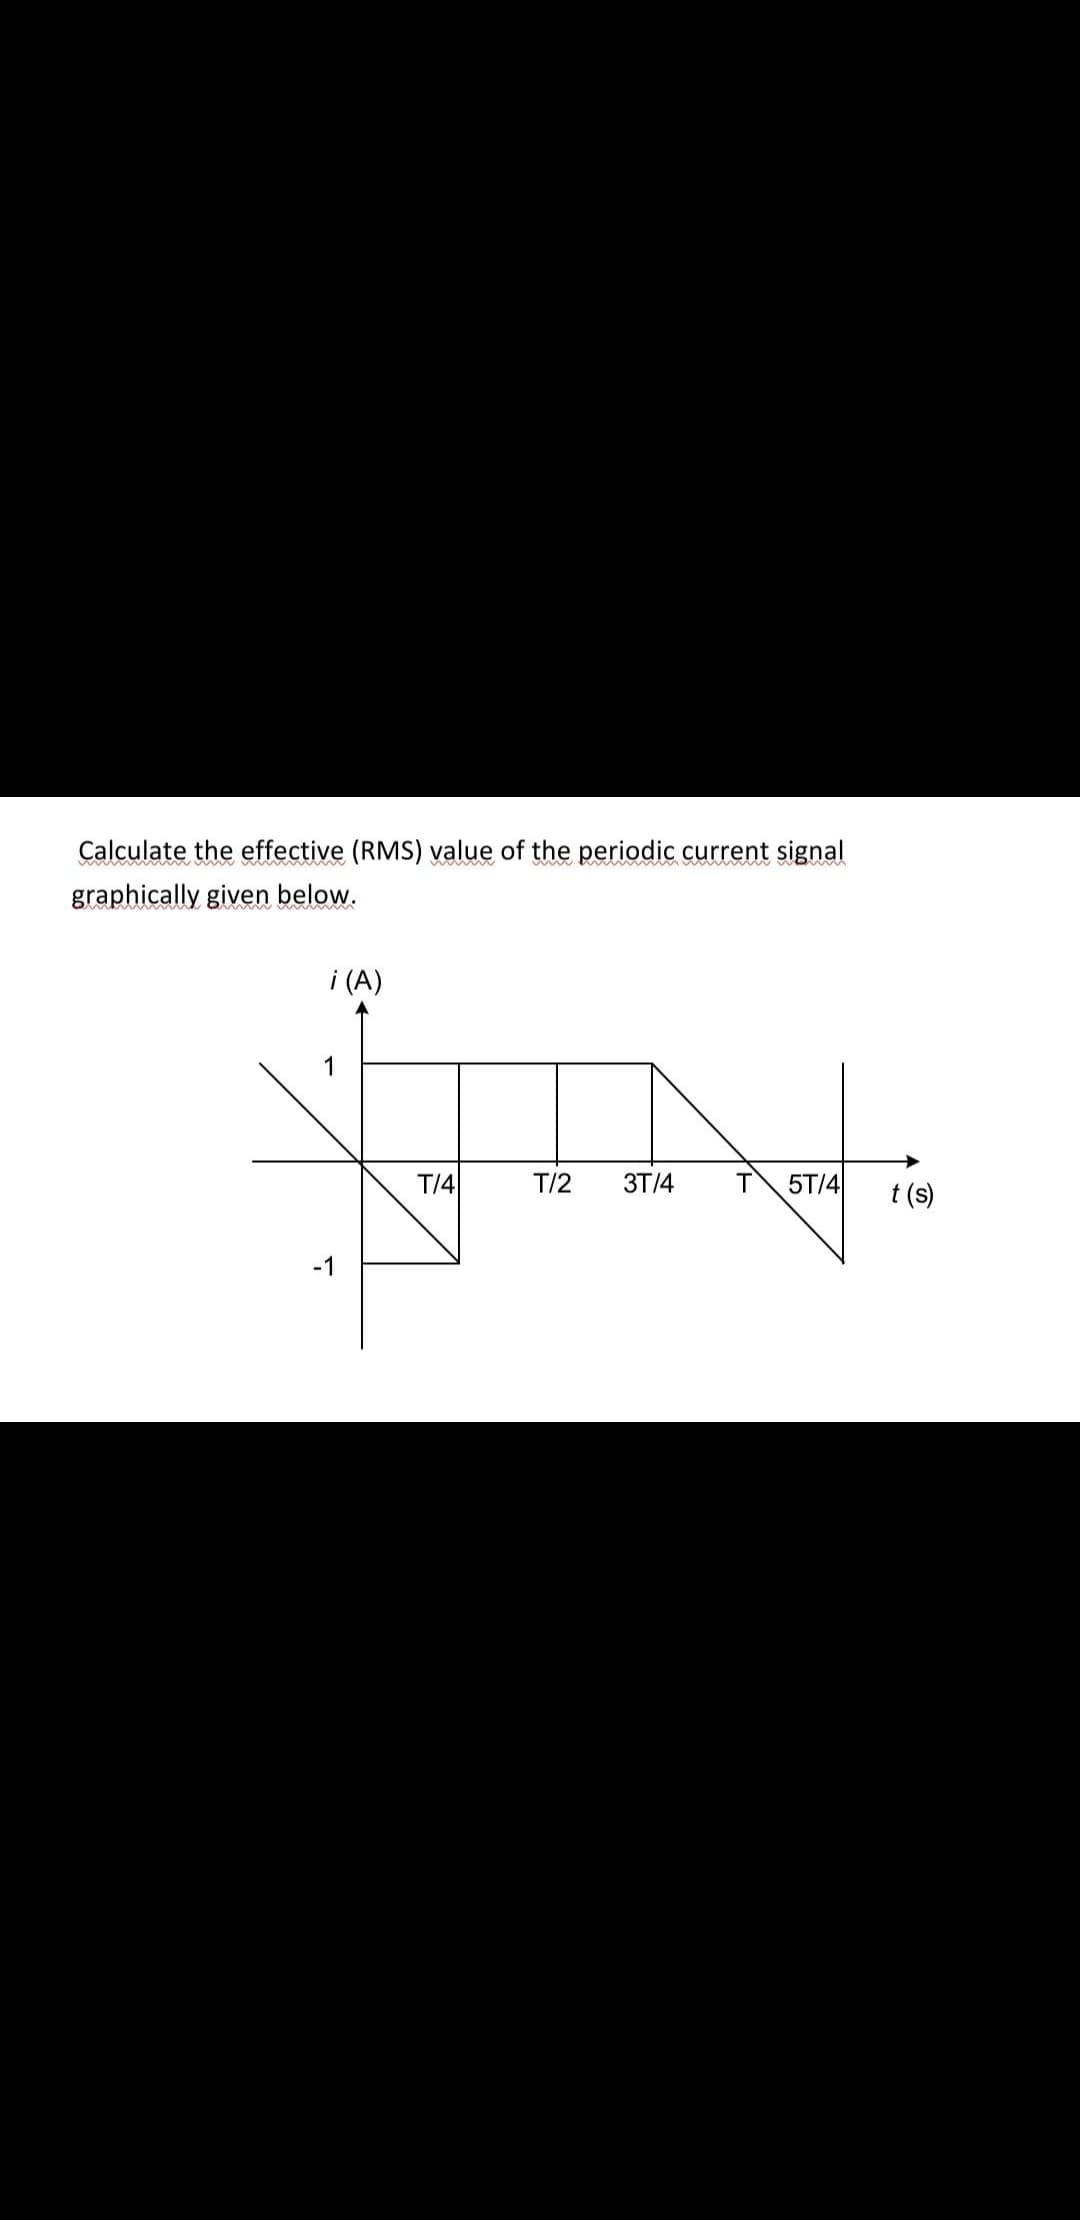 Calculate the effective (RMS) value of the periodic current signal
wwww.
graphically given below.
i (A)
T/4
T/2
3T/4
5T/4
t (s)
-1
